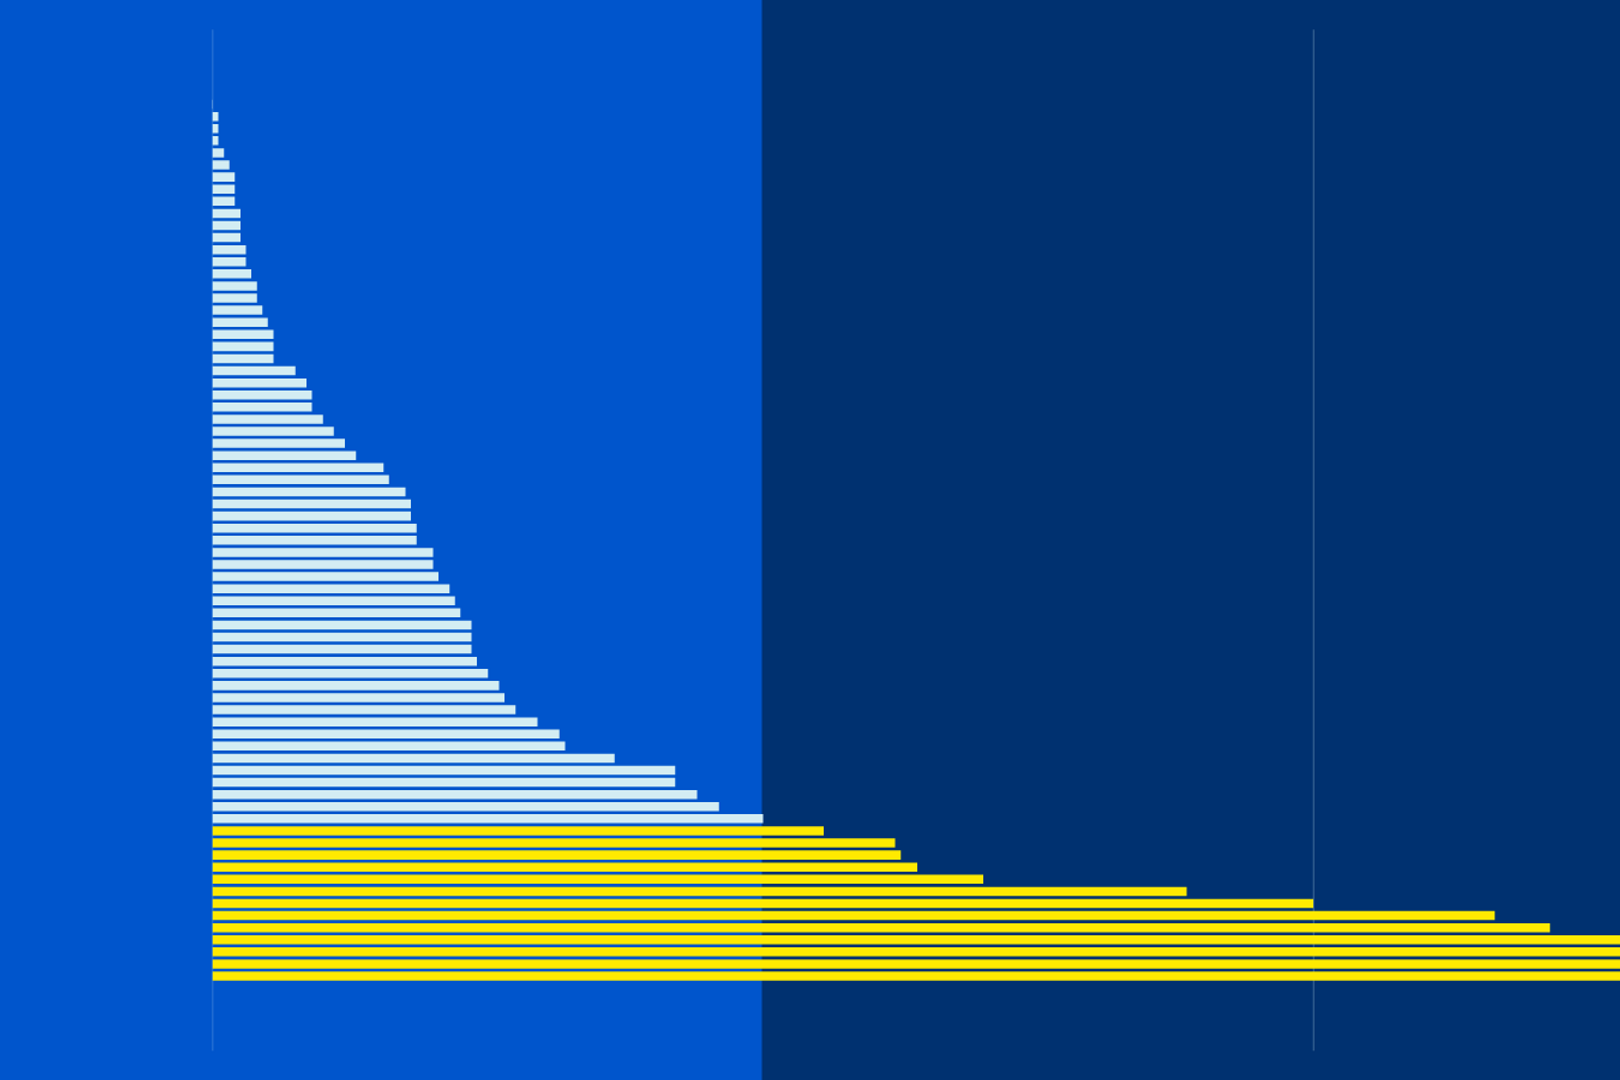 A horizontal barh chart with the largest values at the bottom of the y-axis coloured in yellow. All labels and axes are removed leaving just the bars.